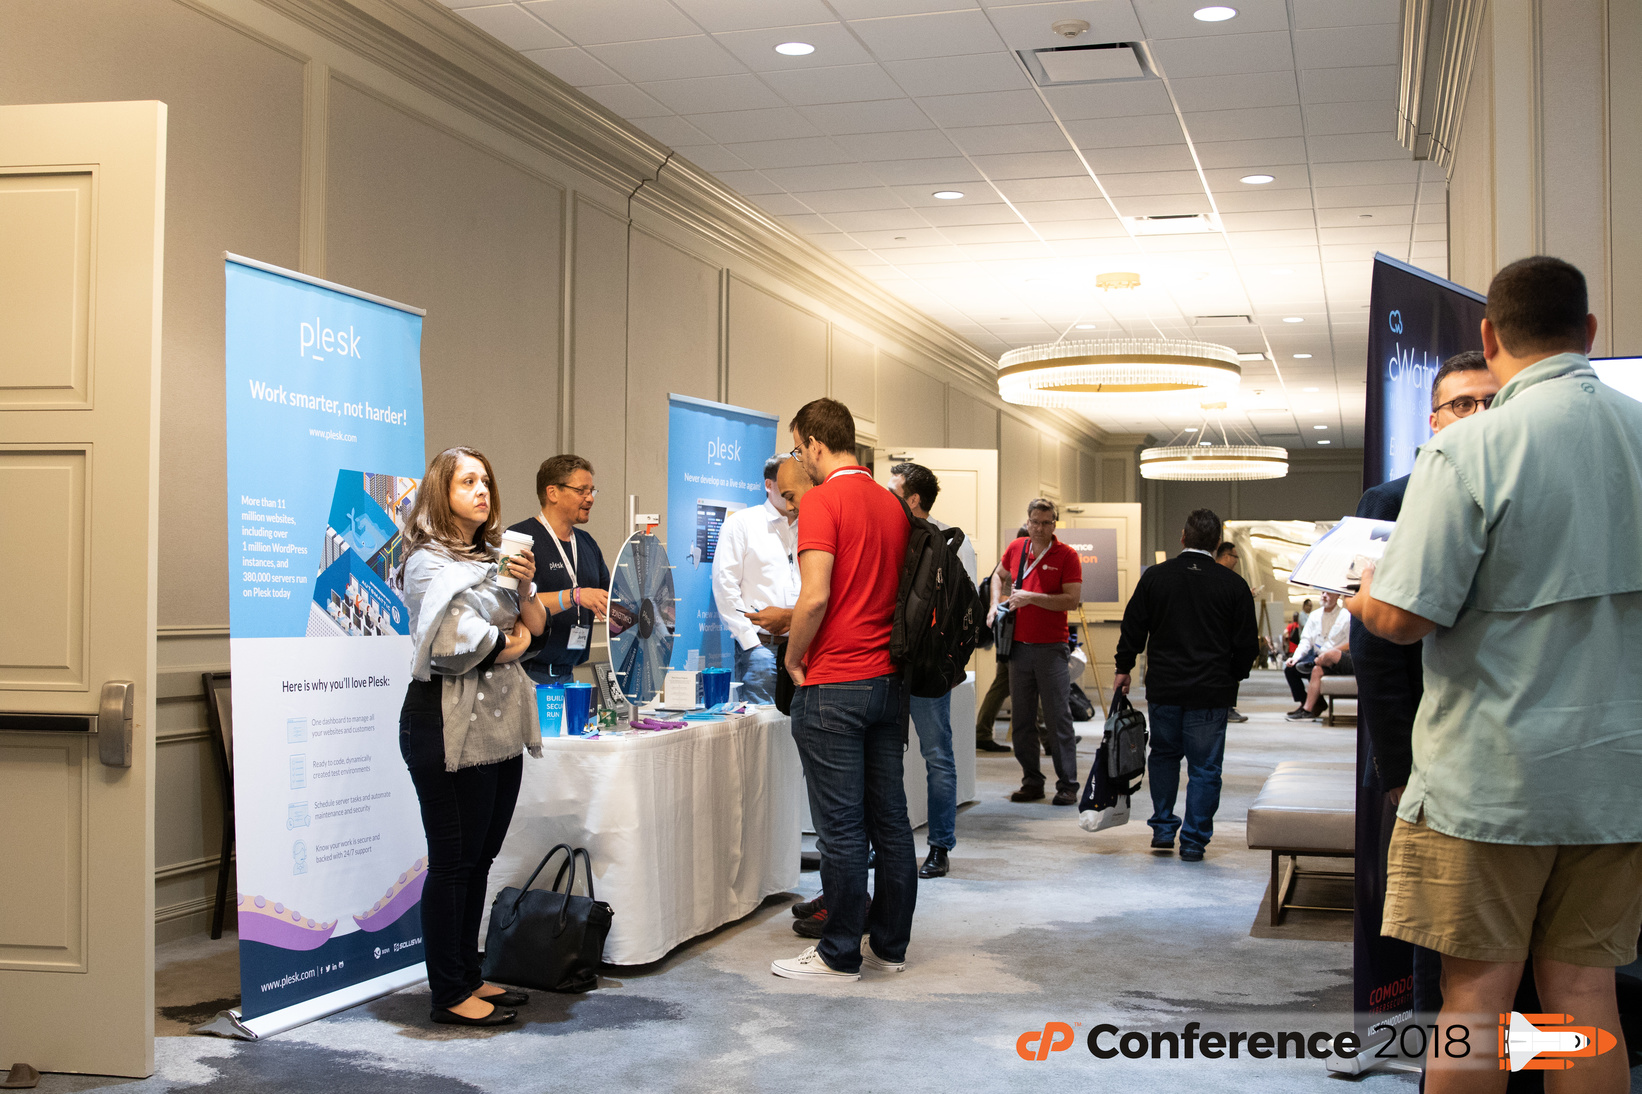 cPanel Conference 2018 exhibition hall